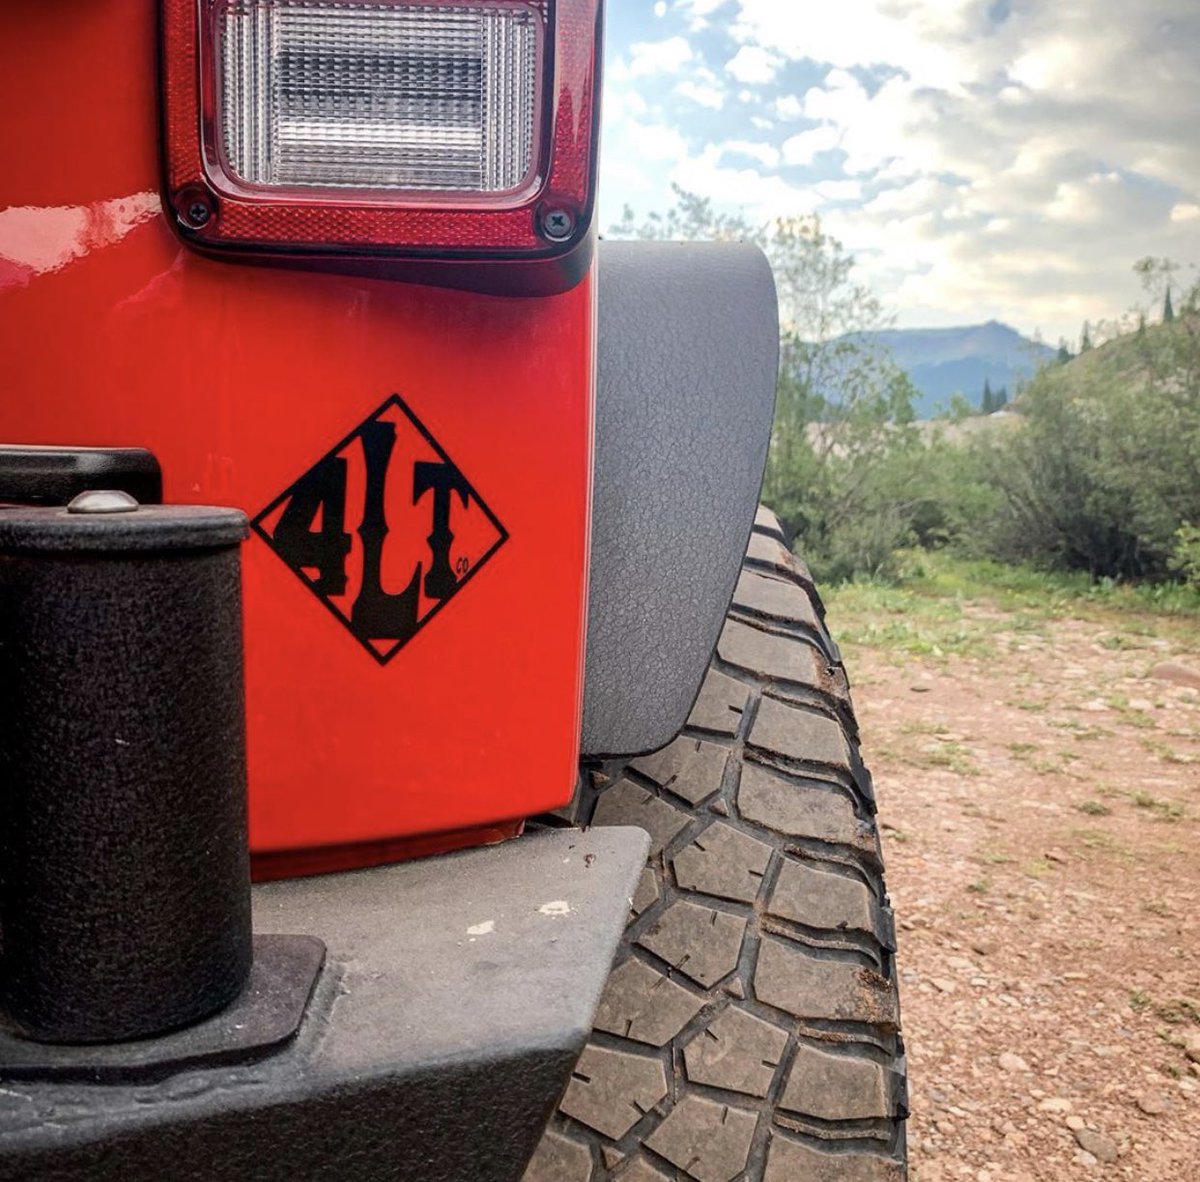 @JeepAroundTexas rocking their 4 Low Terrain Co decal in Colorado! 🏔 Where has your rig taken you?